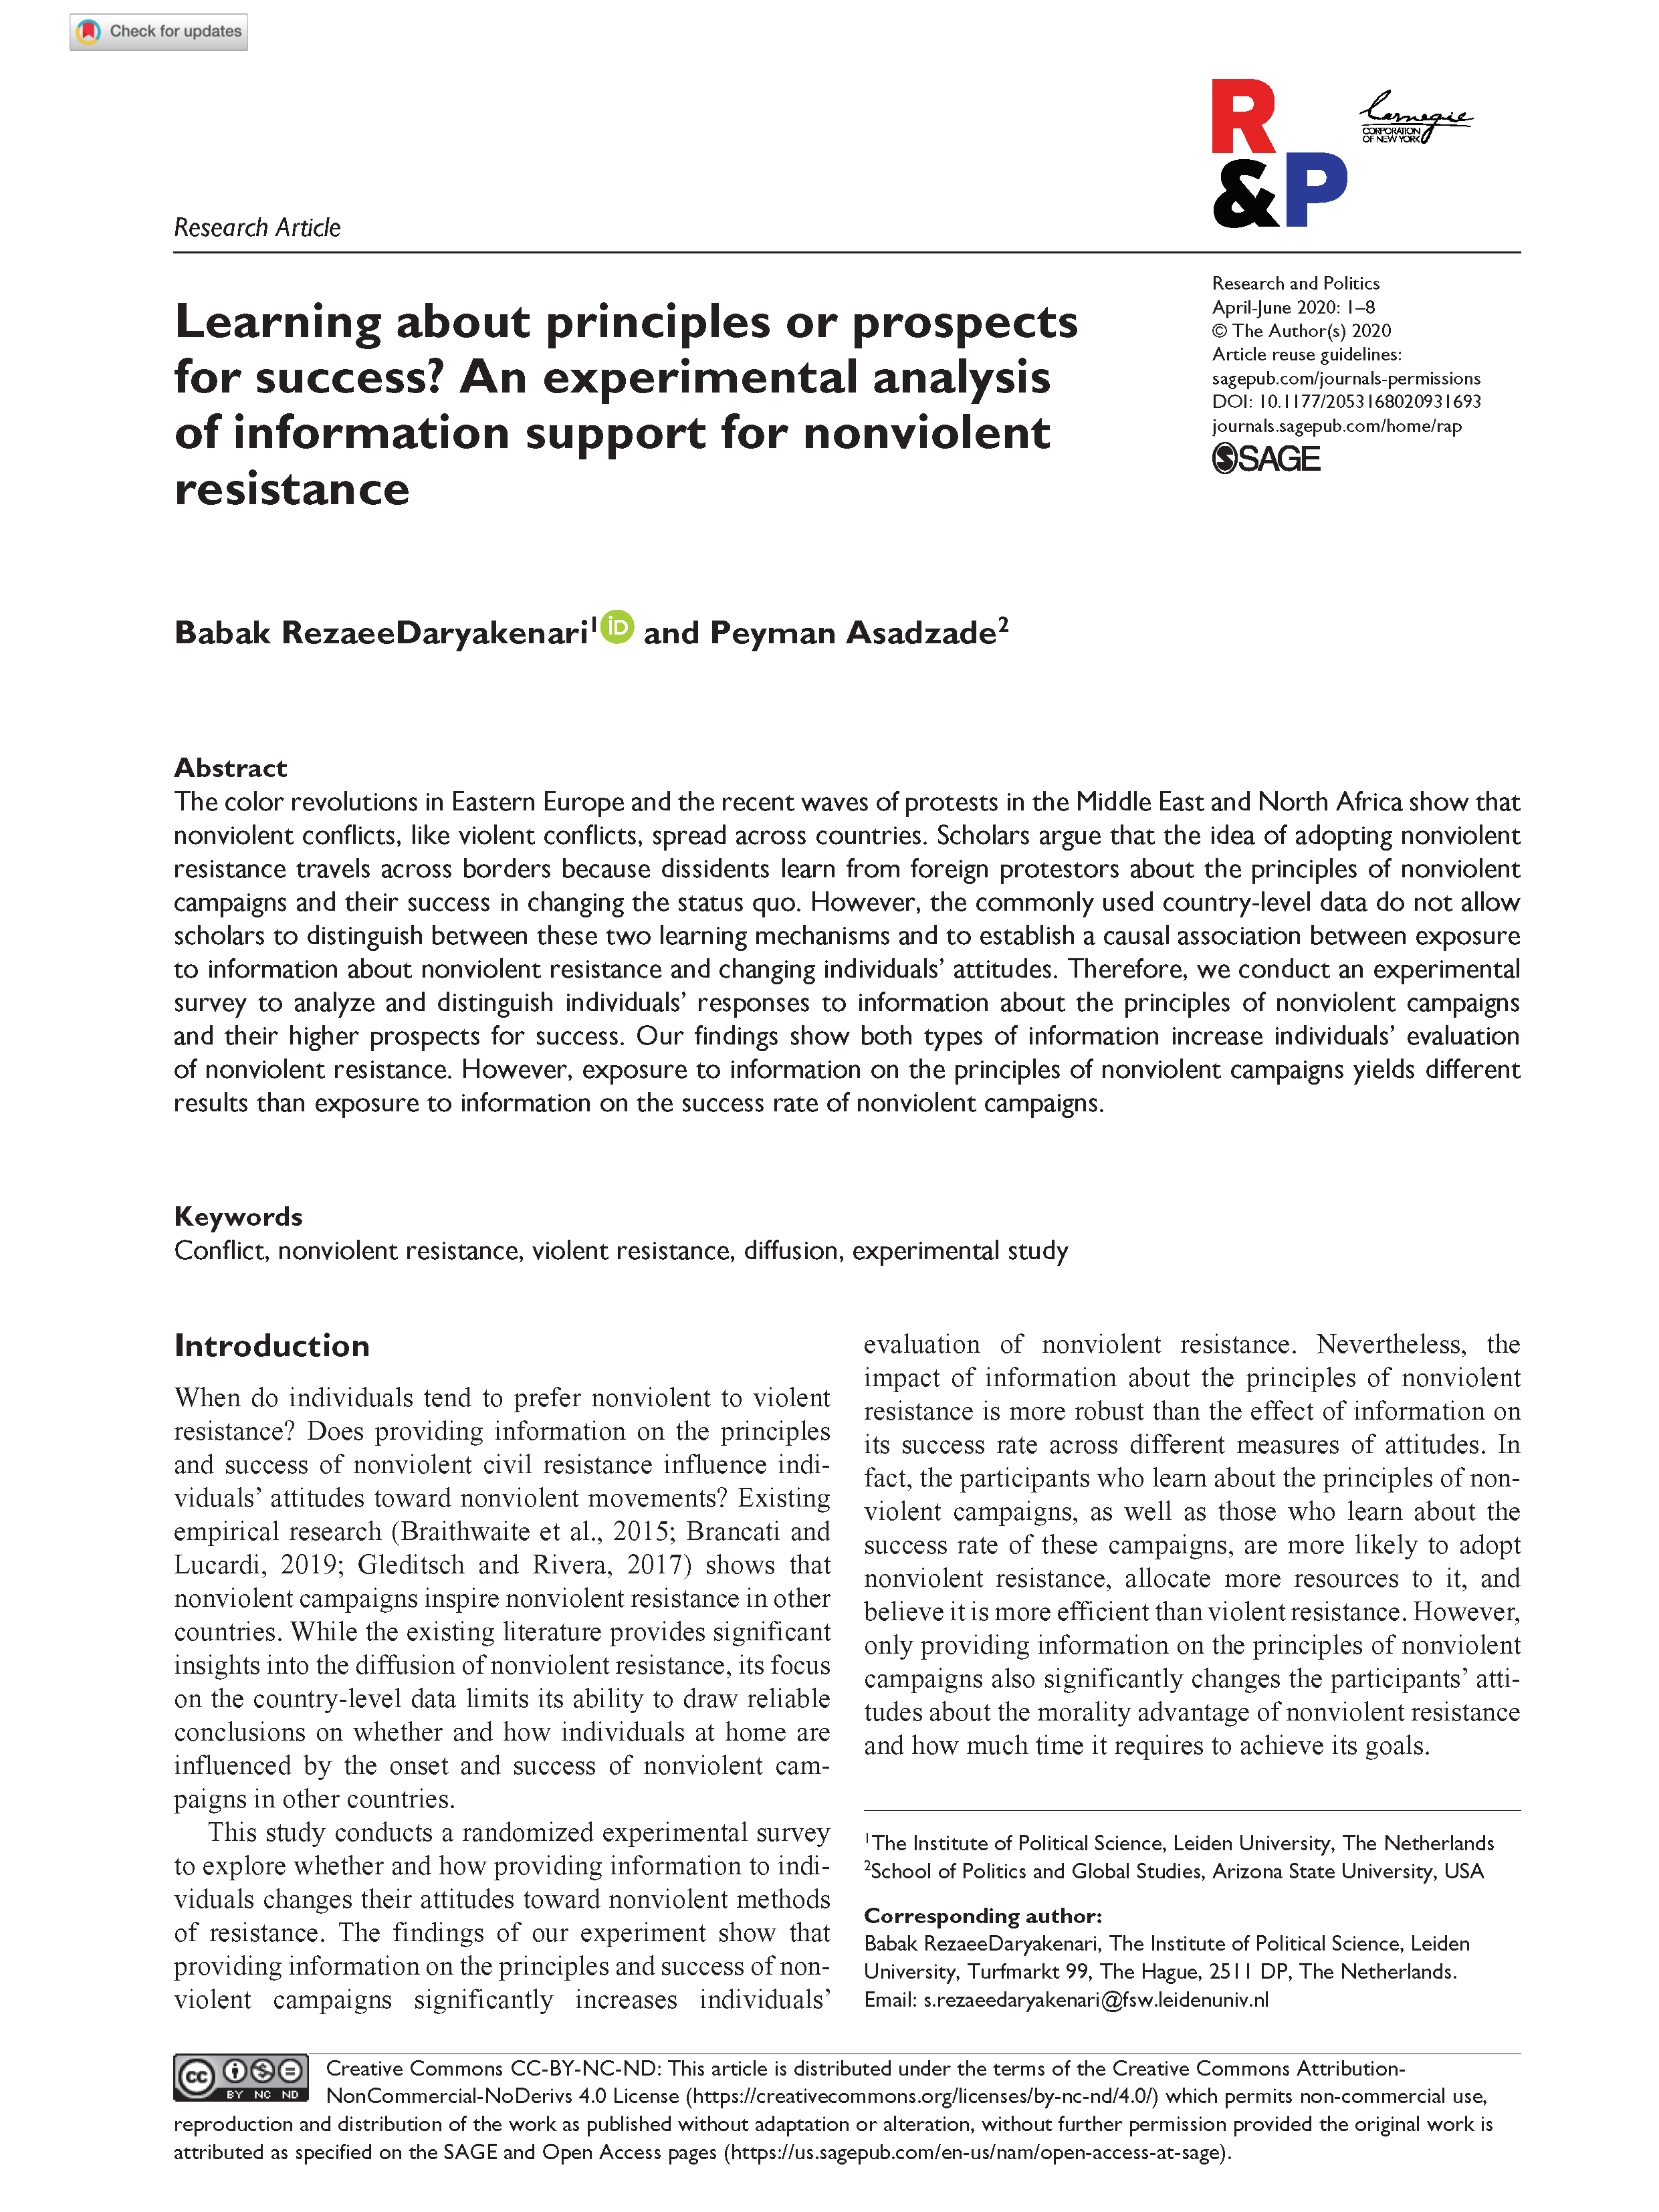 Learning about principles or prospects for success? An experimental analysis of information support for nonviolent resistance